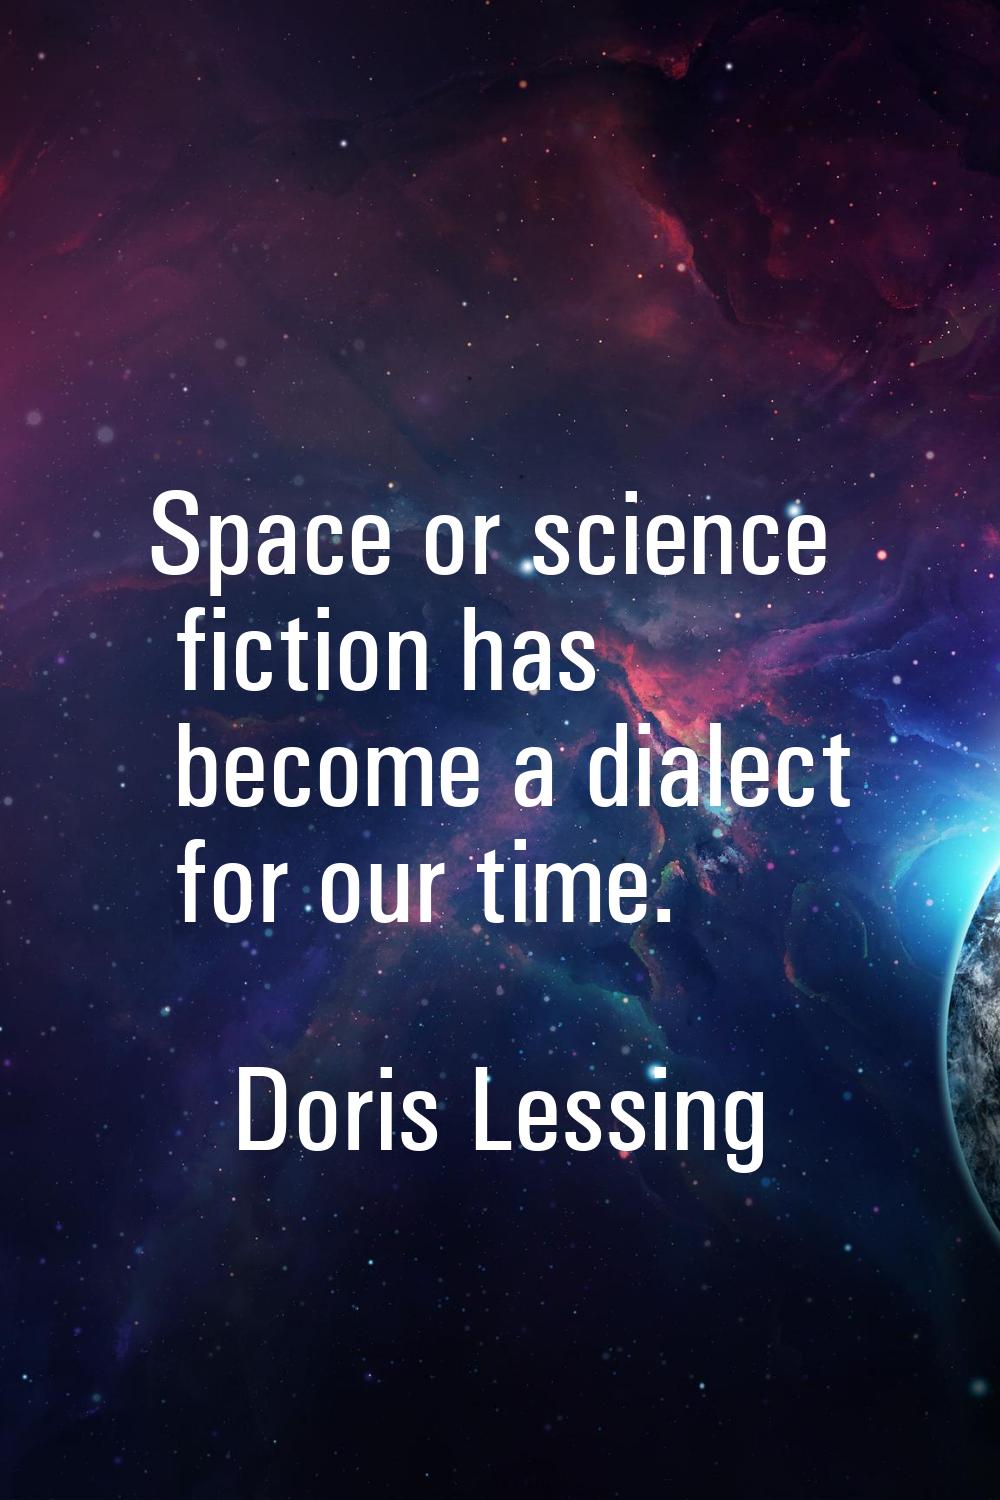 Space or science fiction has become a dialect for our time.